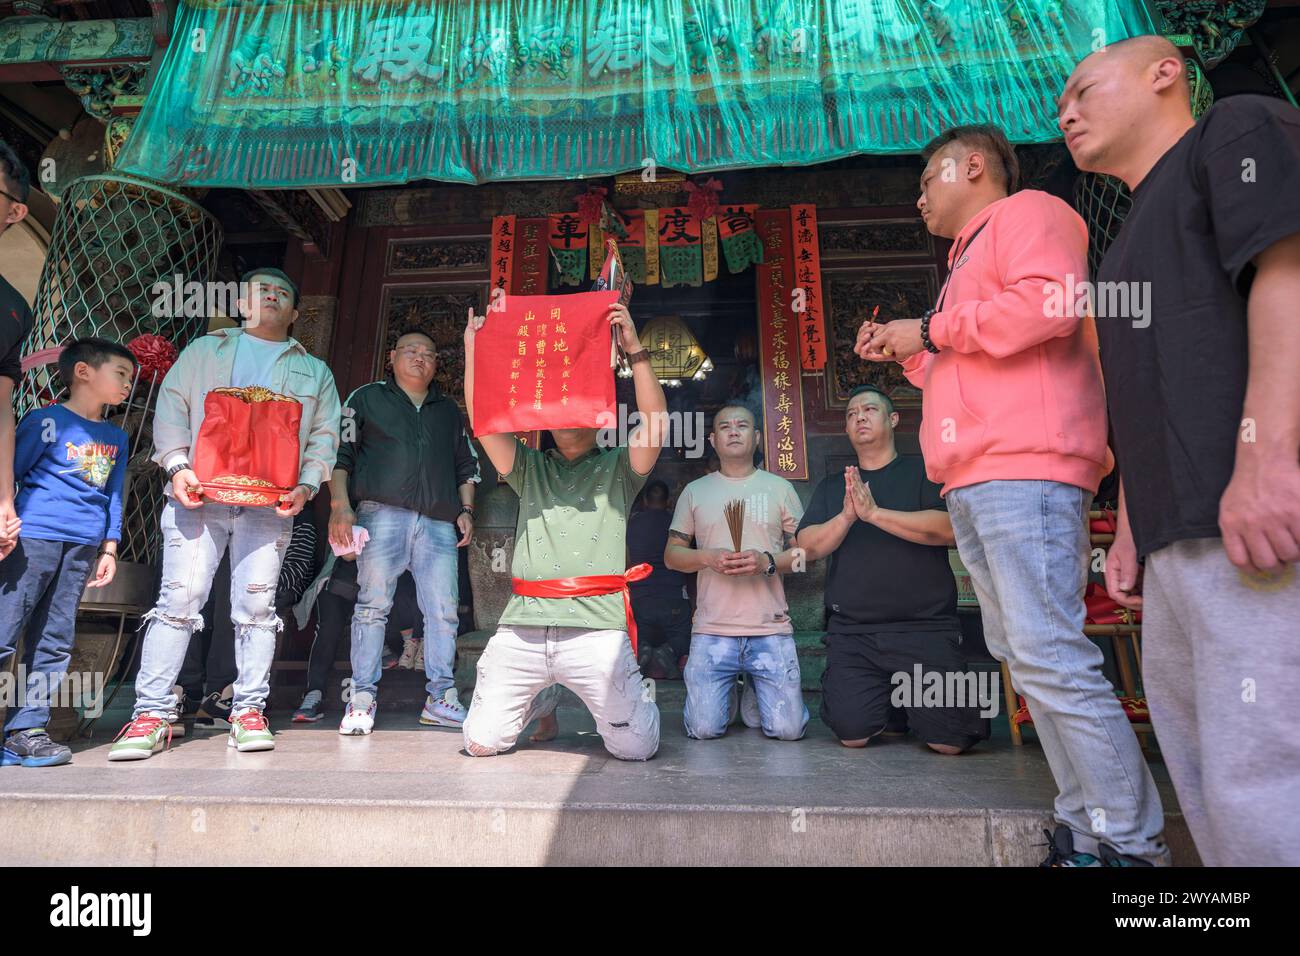 Temple ritual with individuals holding a red ritual banner Stock Photo